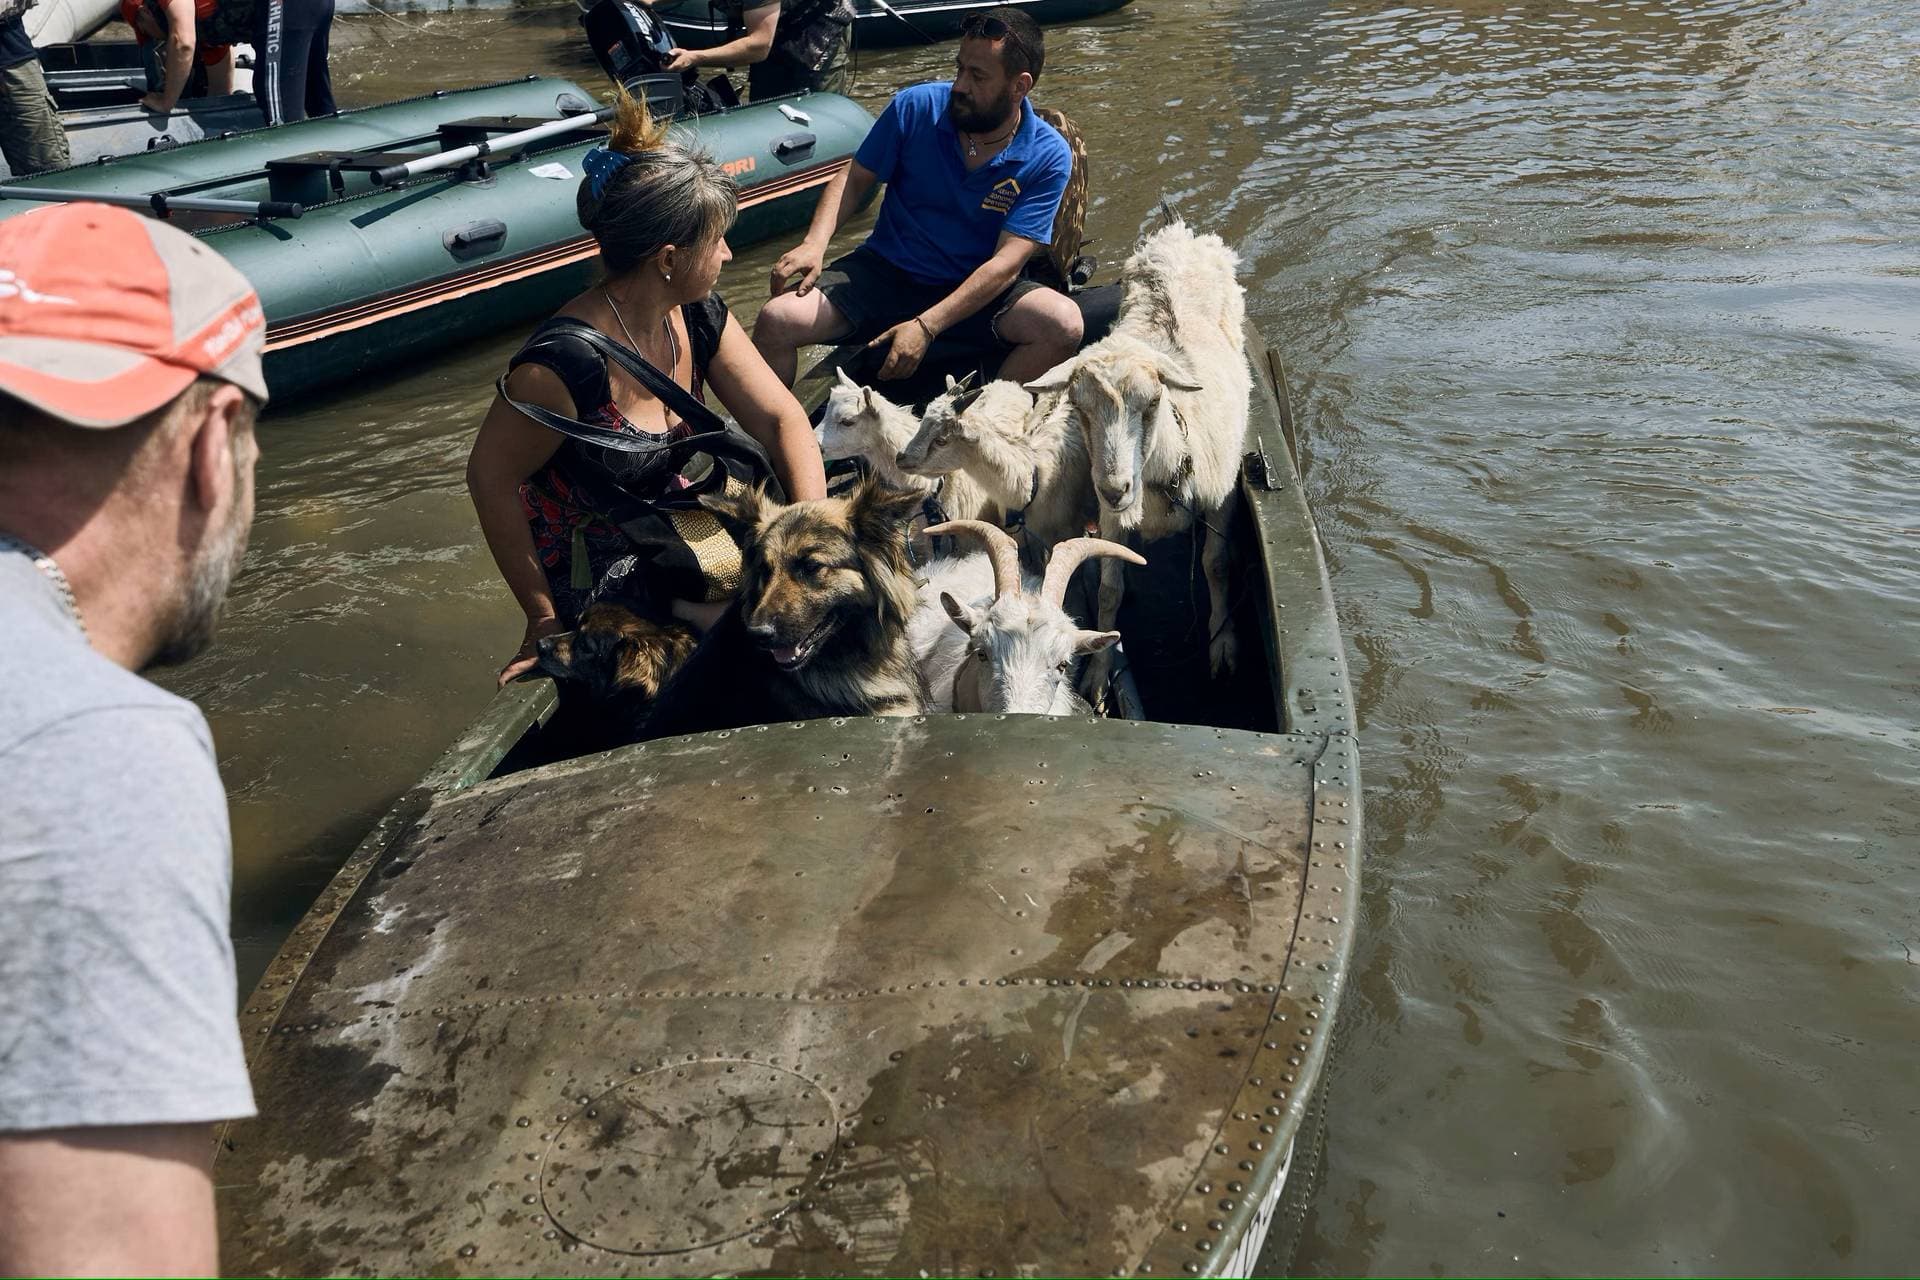 Volunteers evacuate dogs and goats from the flooded city in Kherson